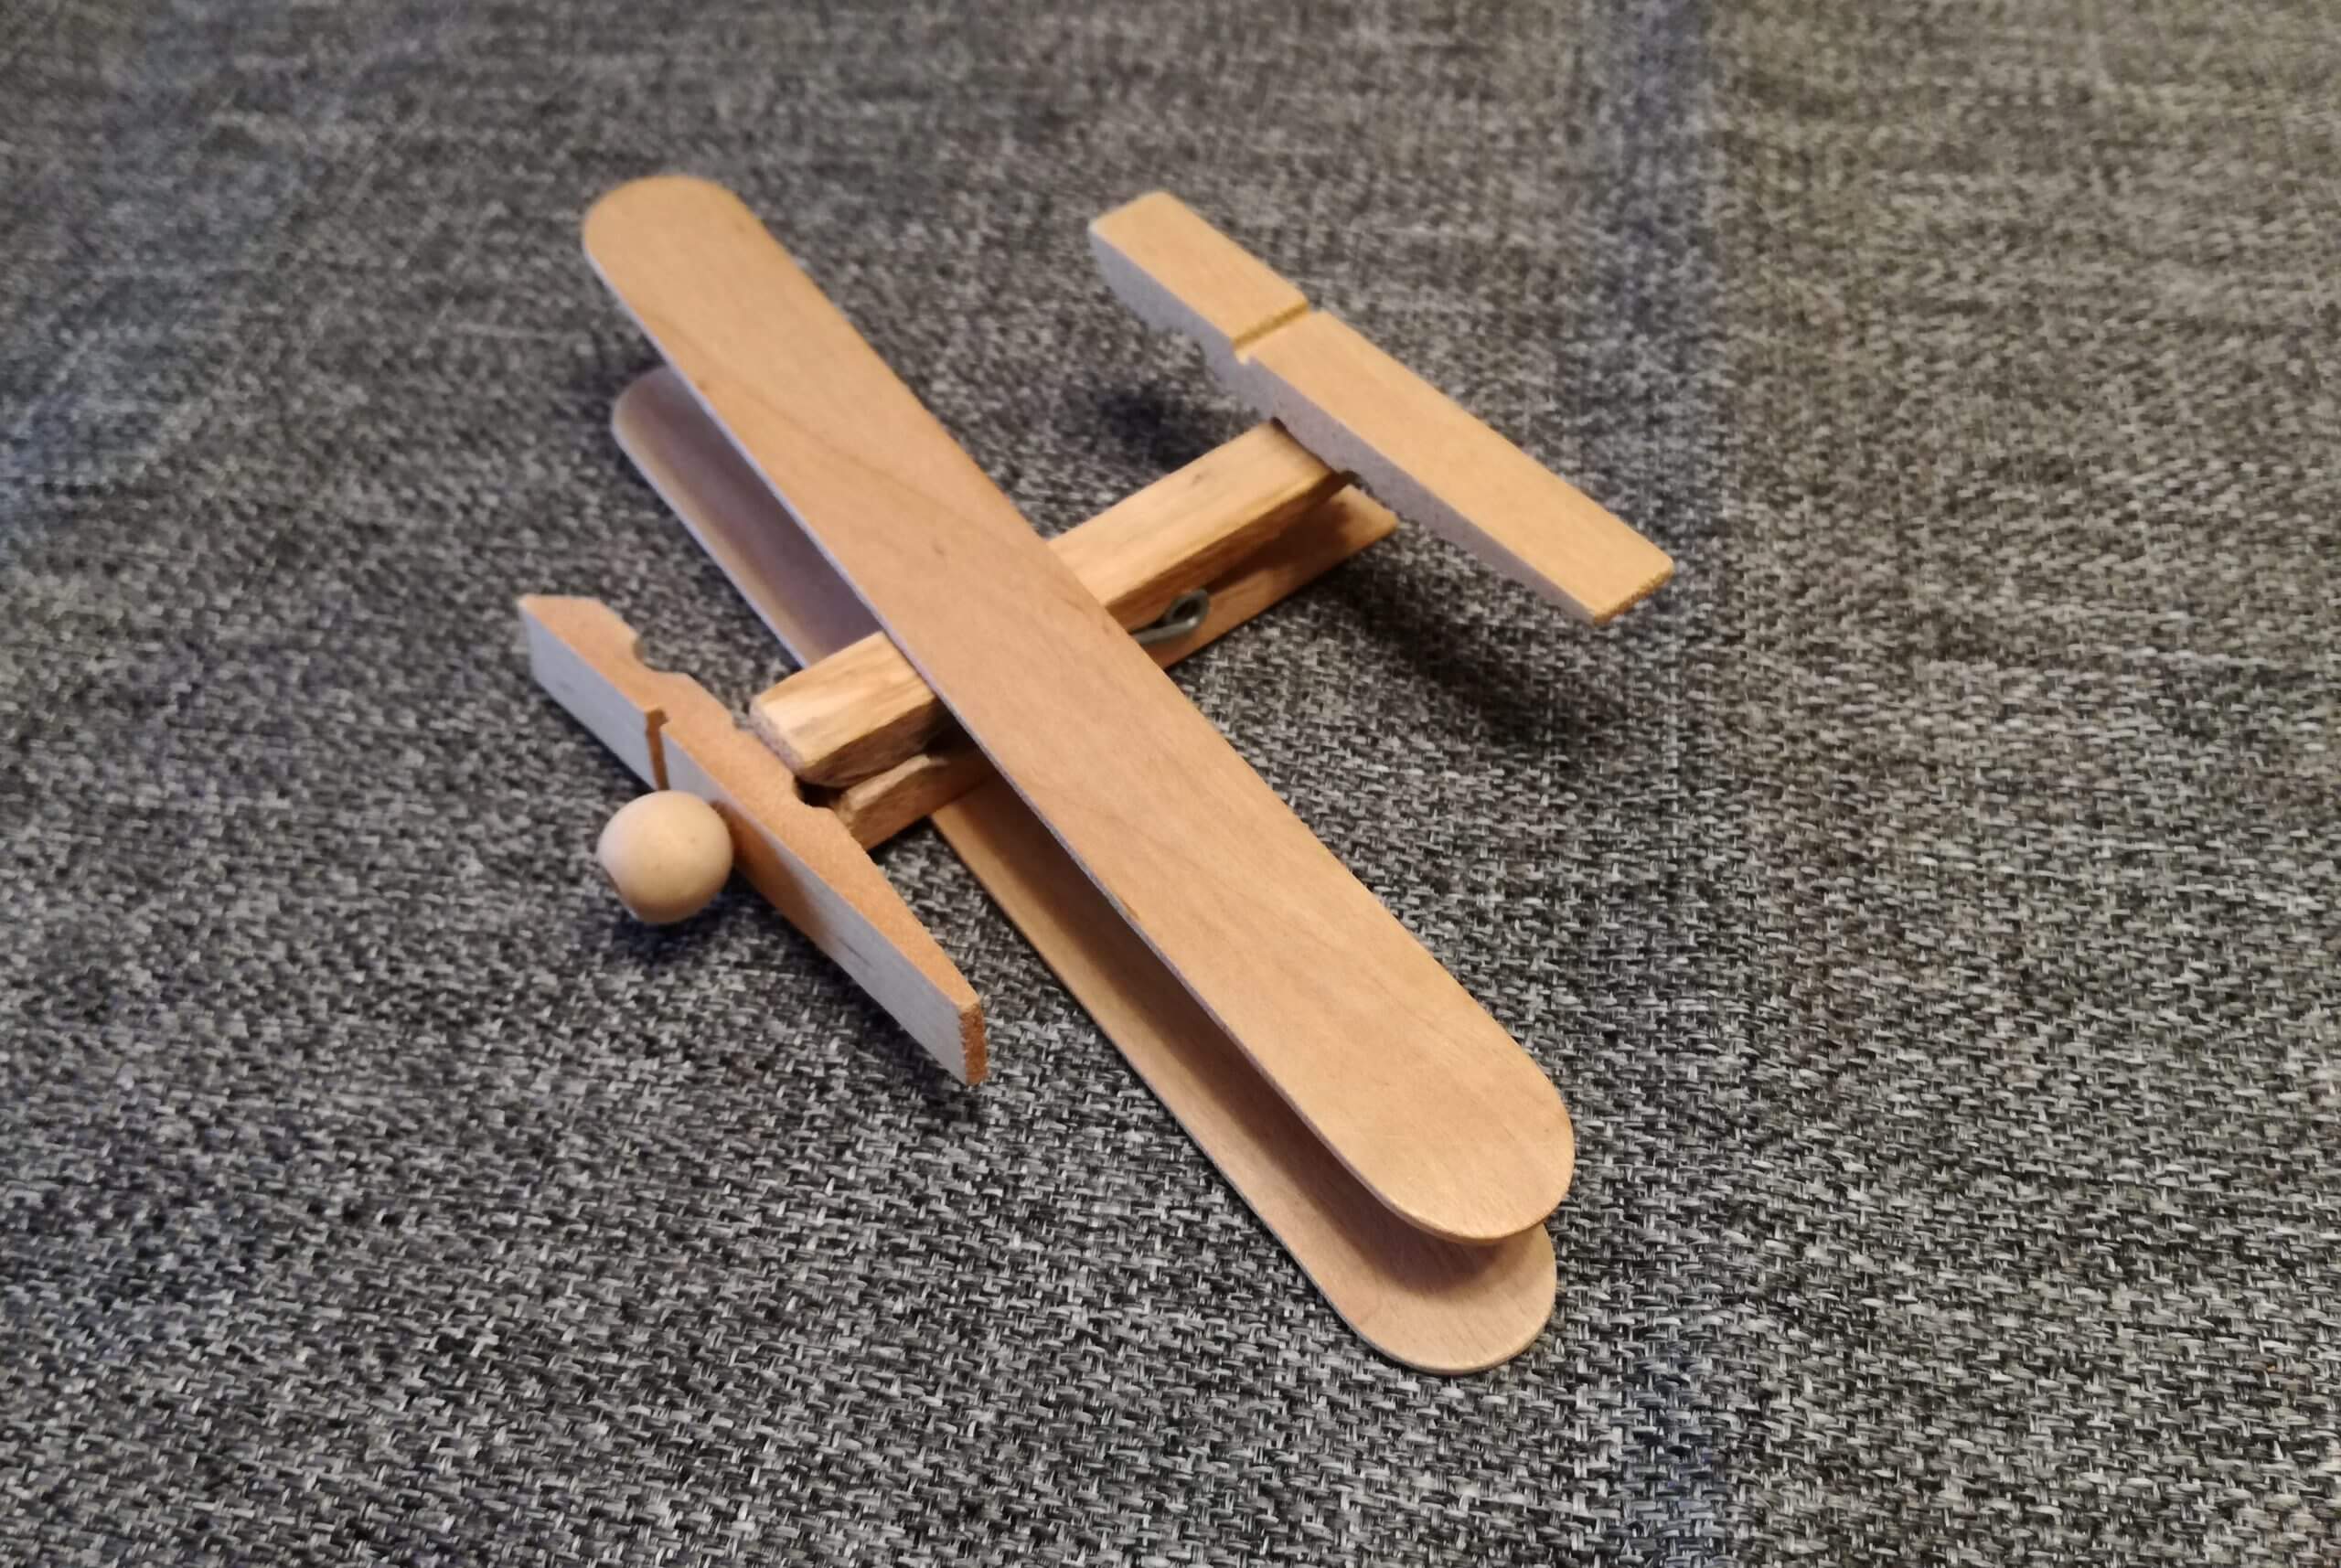 An airplane made of wooden clothespins and popsicle sticks.